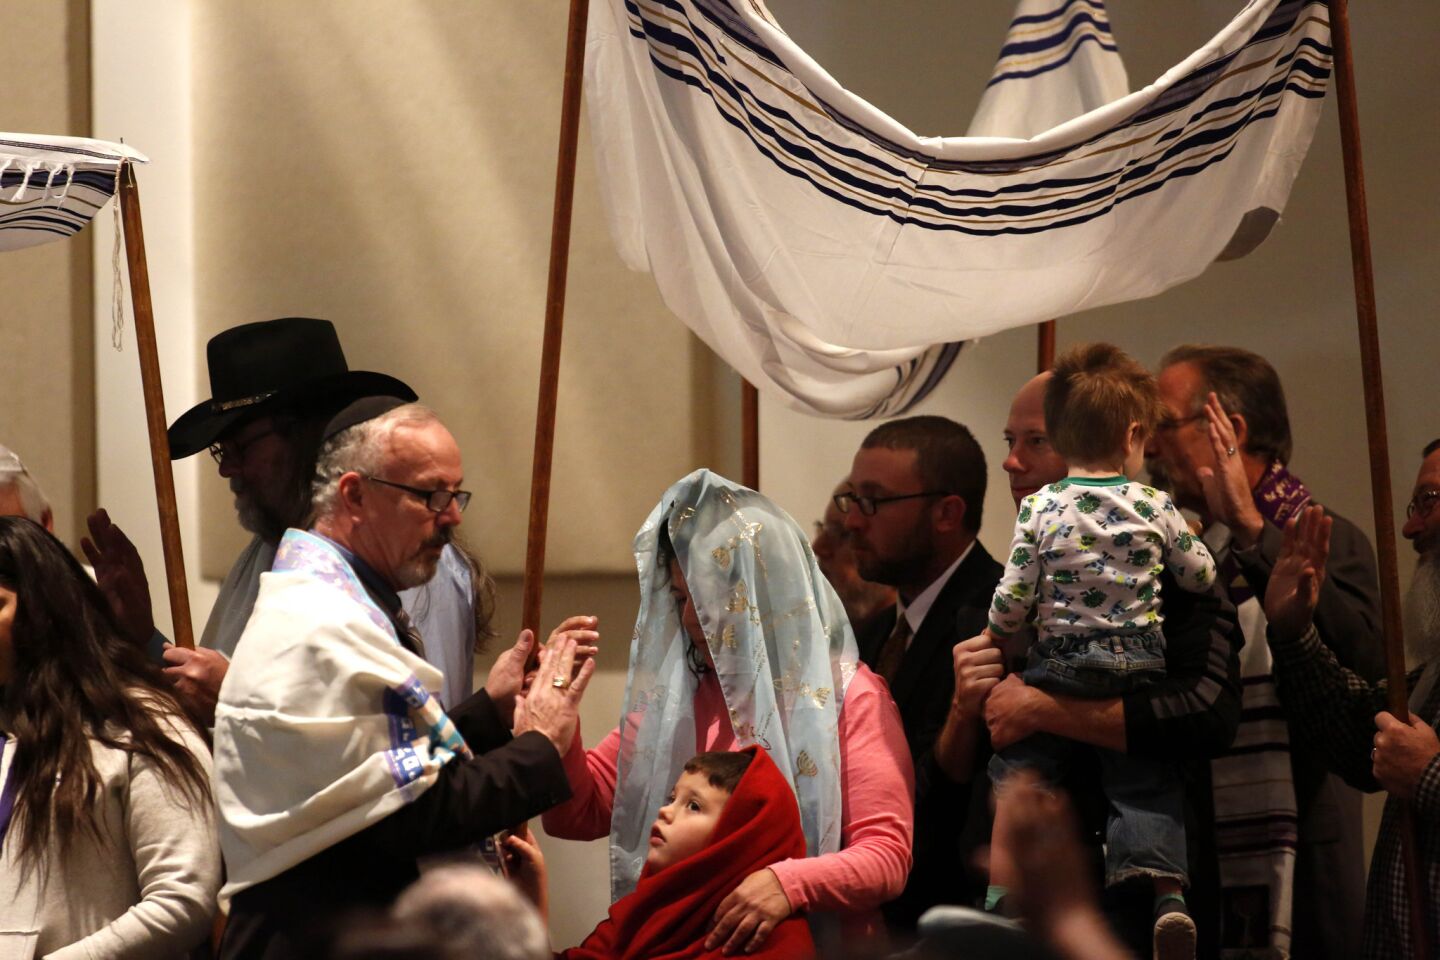 A Shabbat service was part of the memorial for Nicholas Thalasinos at Shiloh Messianic Congregation in Calimesa, where Thalasinos and his wife, Jennifer, were integral parts of the congregation.